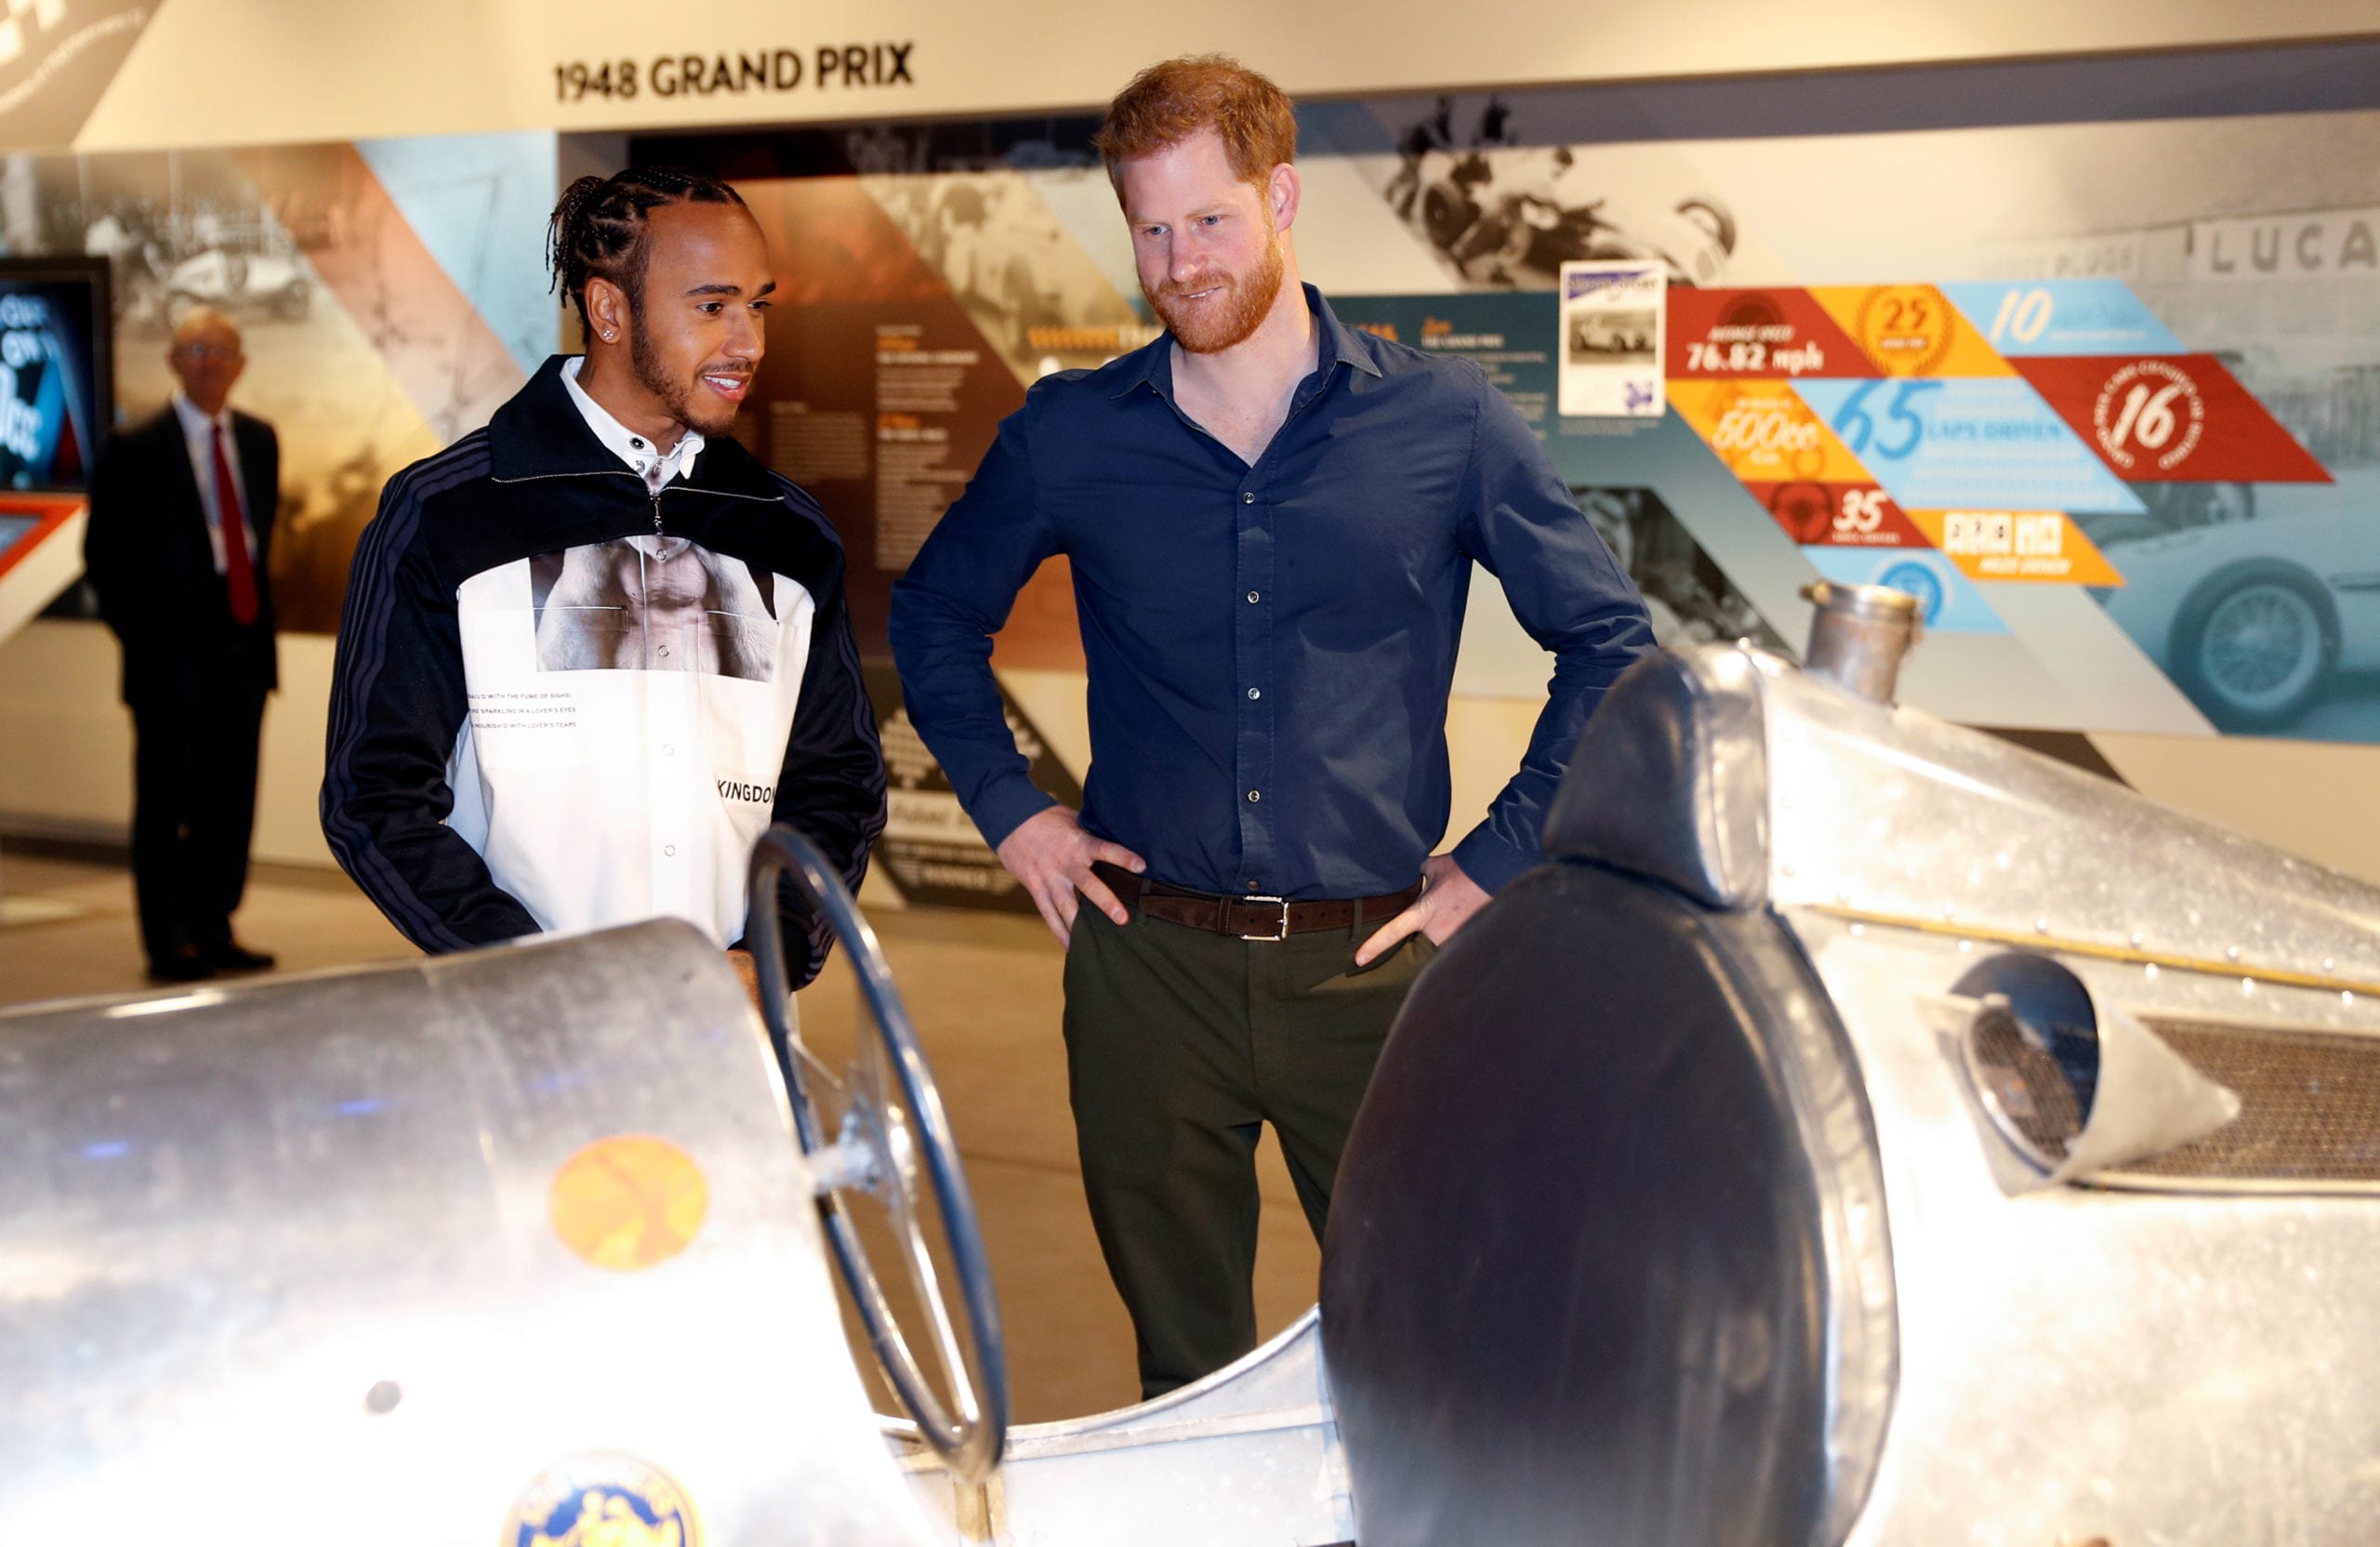 Britain's Prince Harry and Formula One World Champion Lewis Hamilton react as they visit the Silverstone circuit in Towcester, Britain, March 6, 2020. REUTERS/Peter Nicholls/Pool - RC2CEF91HK2Y